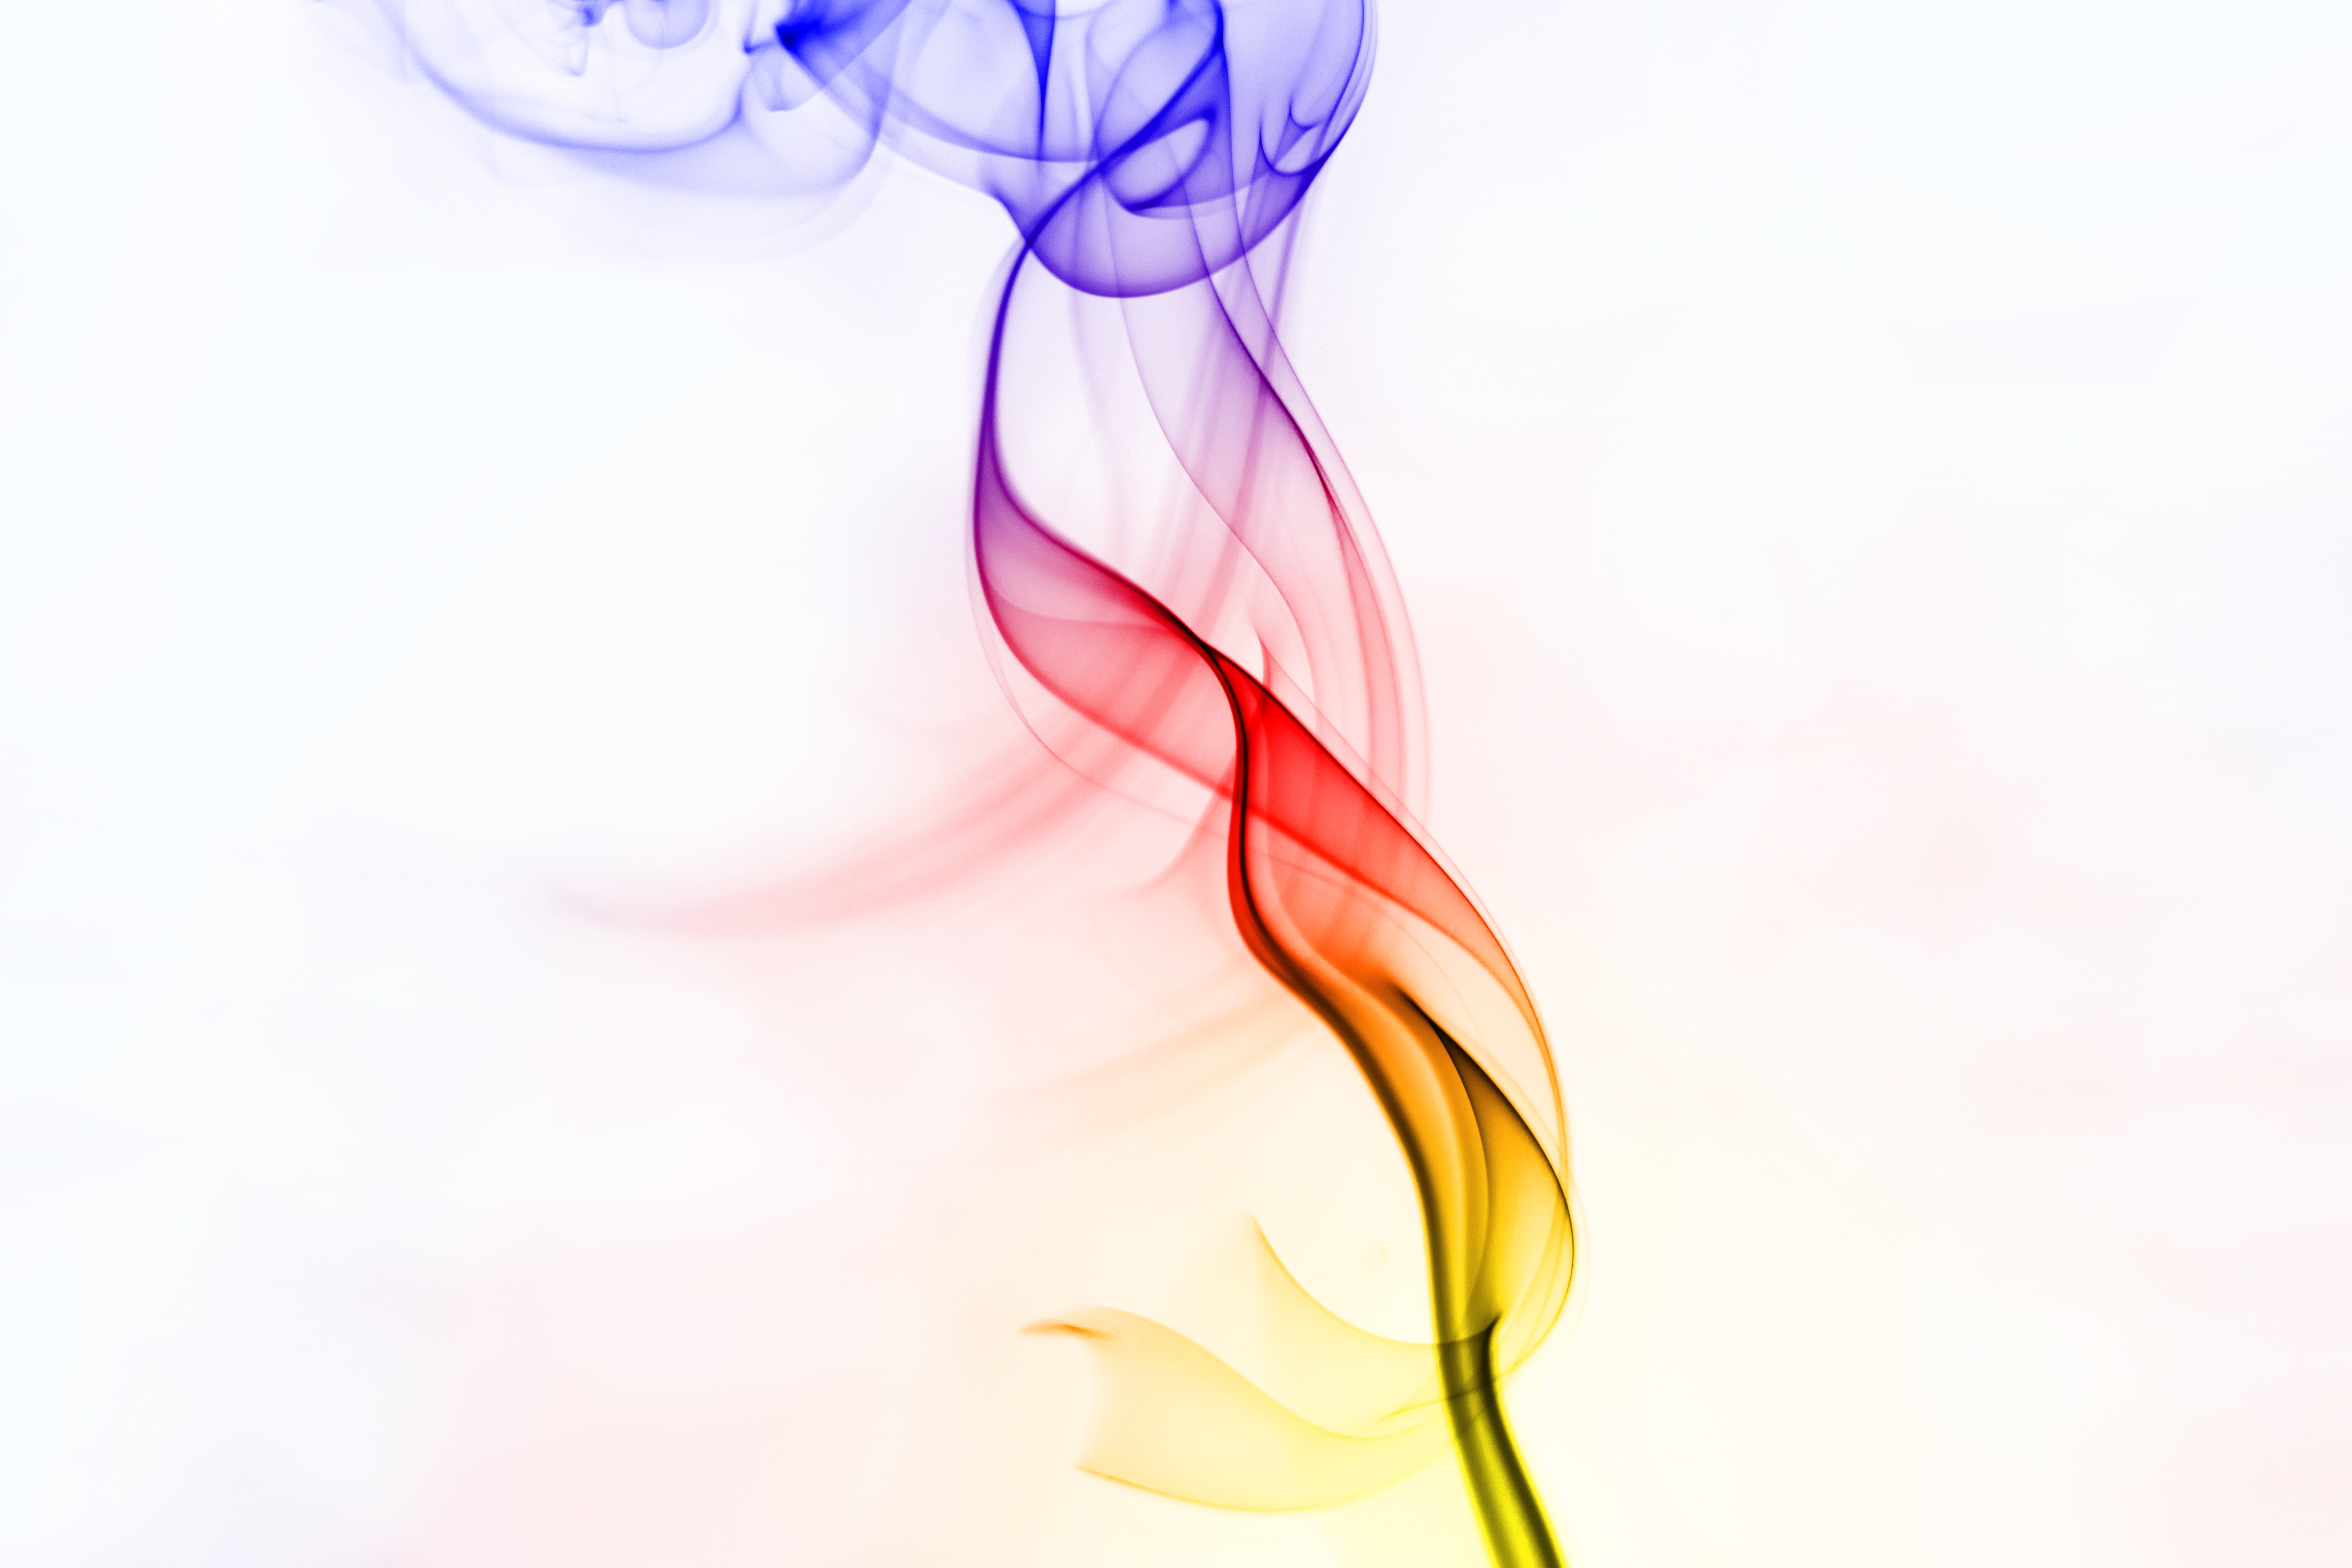 143439 free wallpaper 320x480 for phone, download images bright, colorful, smoke, light 320x480 for mobile